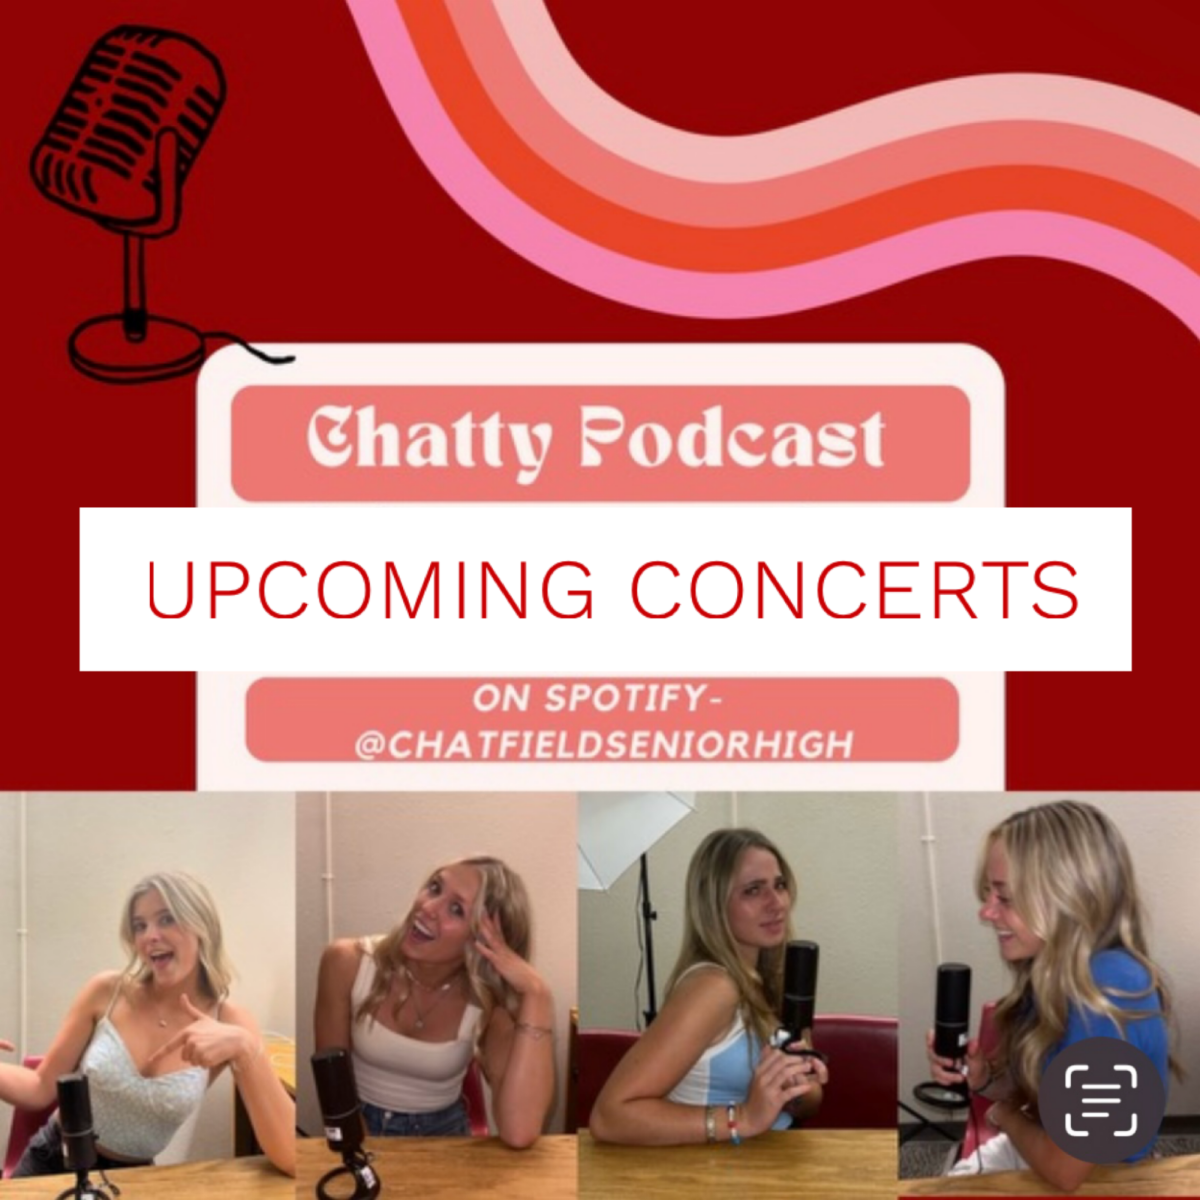 Student Podcast: Upcoming Concerts